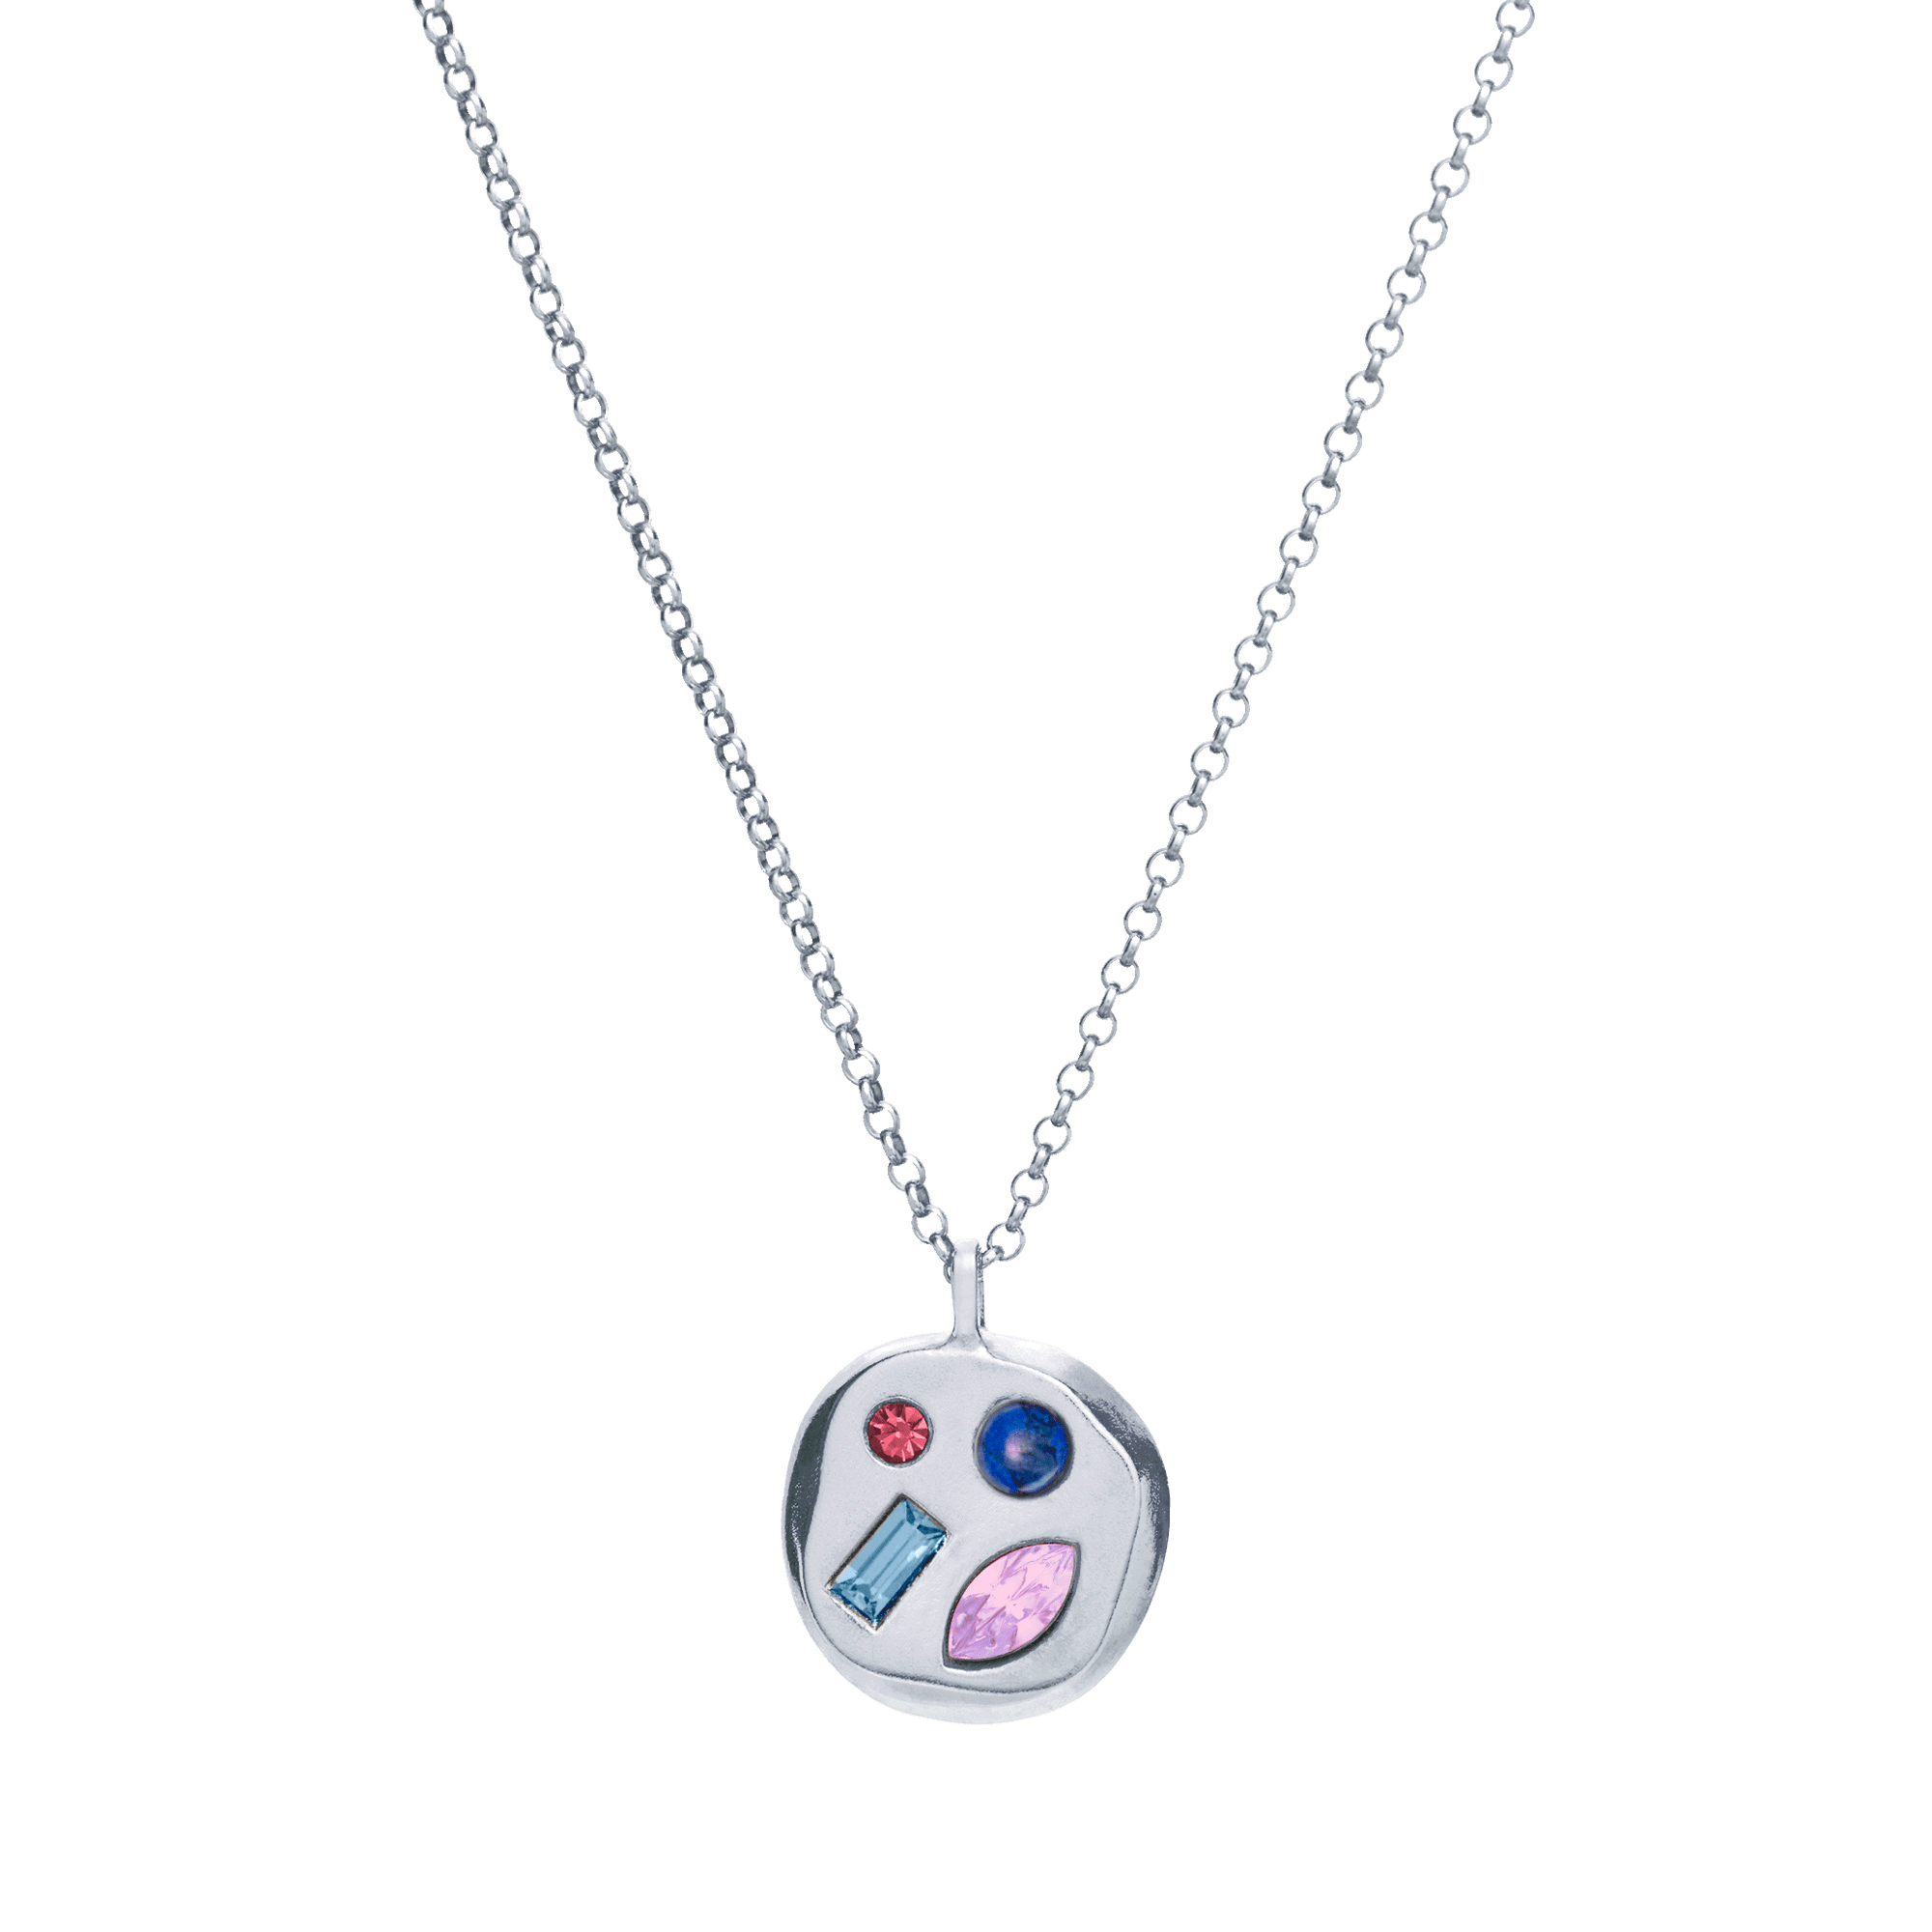 The February Seventeenth Pendant in Sterling Silver